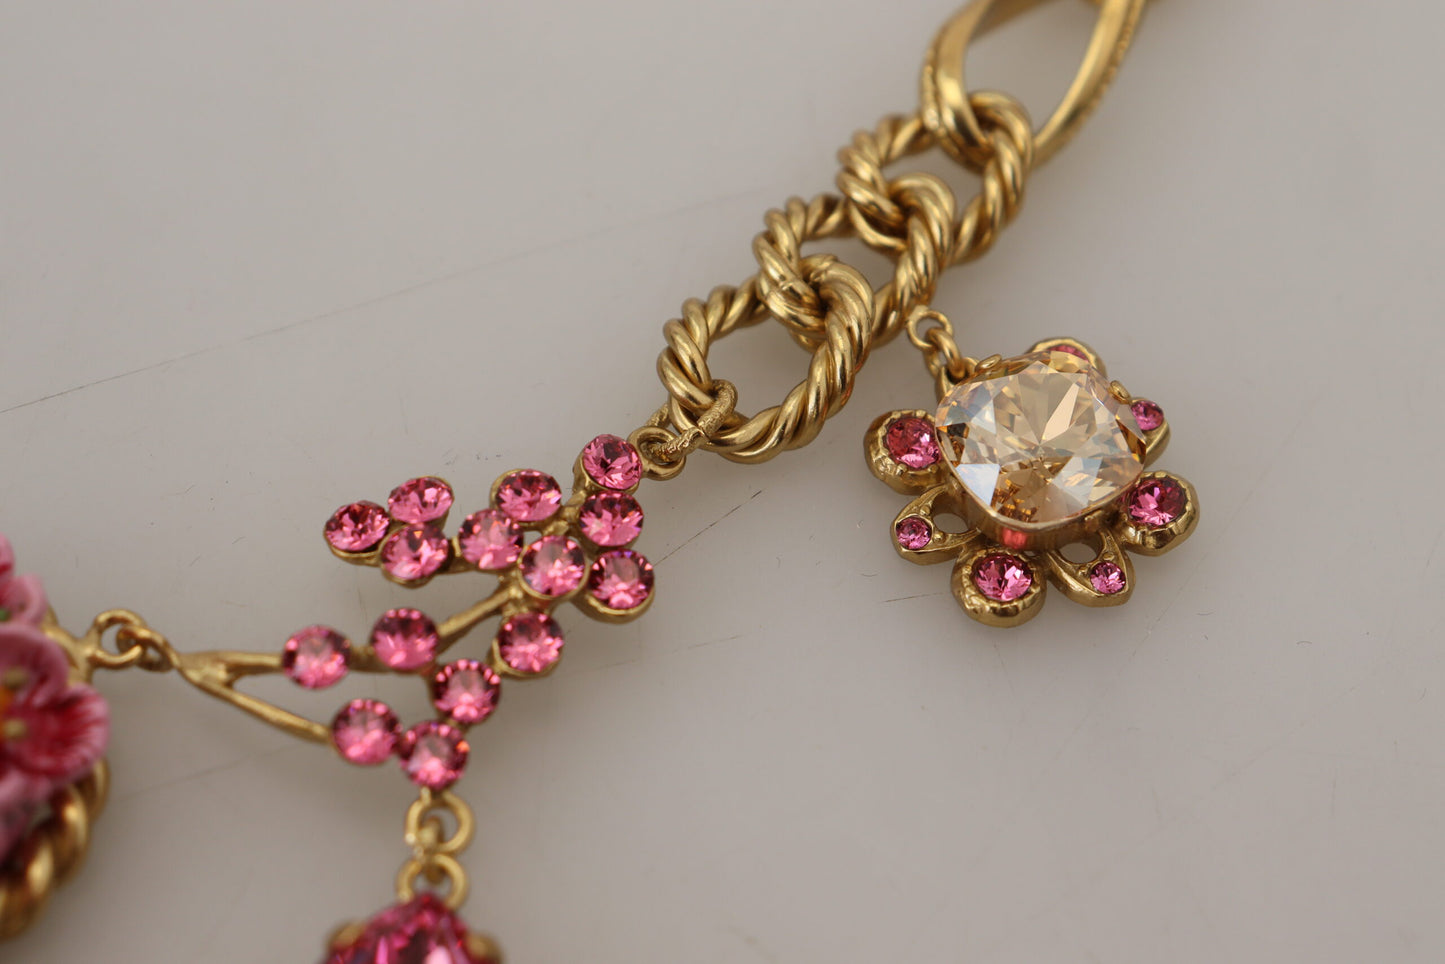 Dolce & Gabbana Gold Brass Chain Crystal Floral Roses Jewelry Necklace - DEA STILOSA MILANO